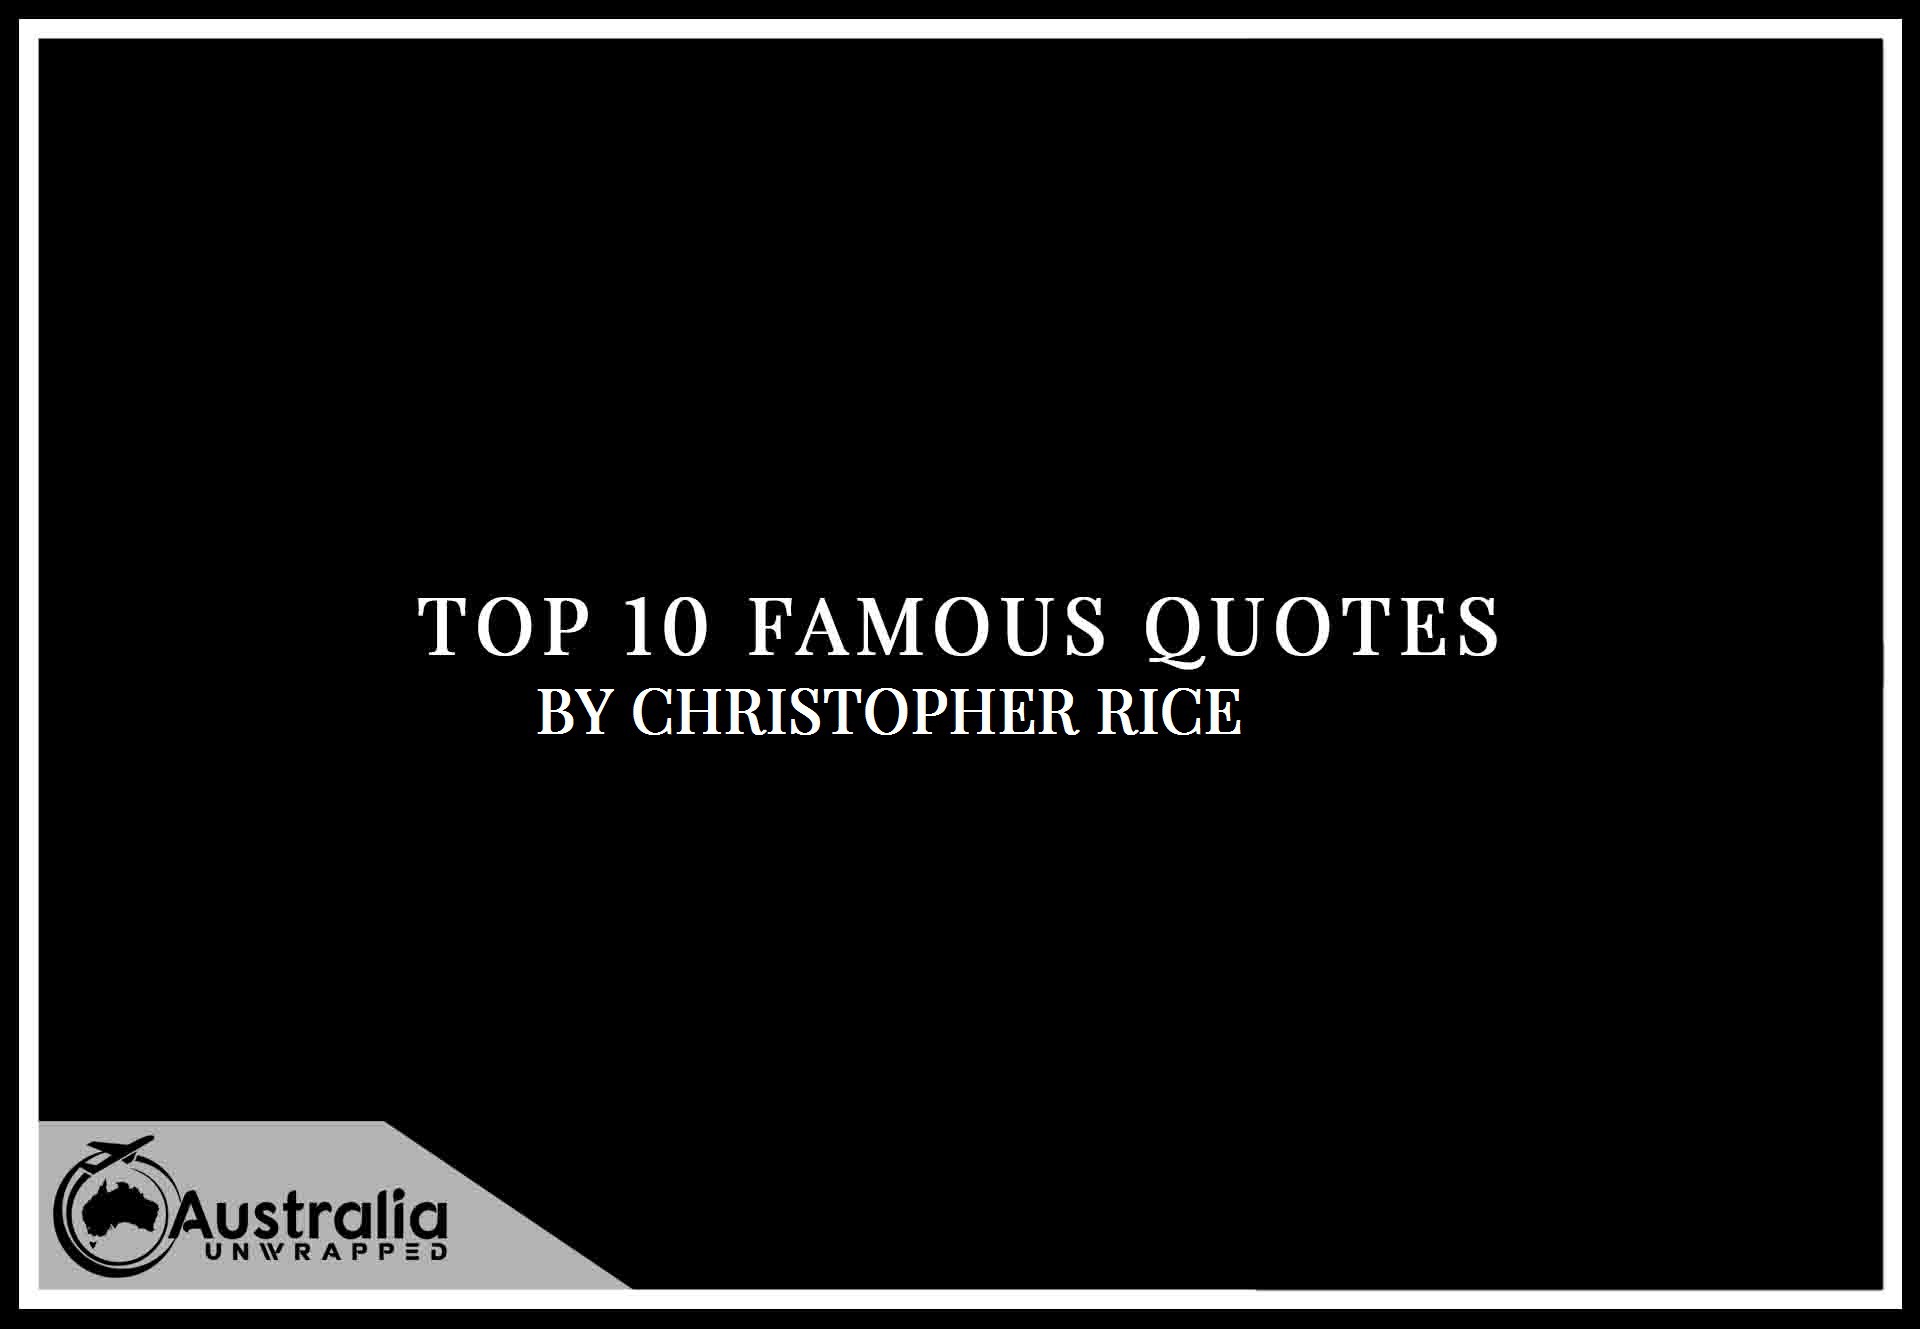 Christopher Rice’s Top 10 Popular and Famous Quotes